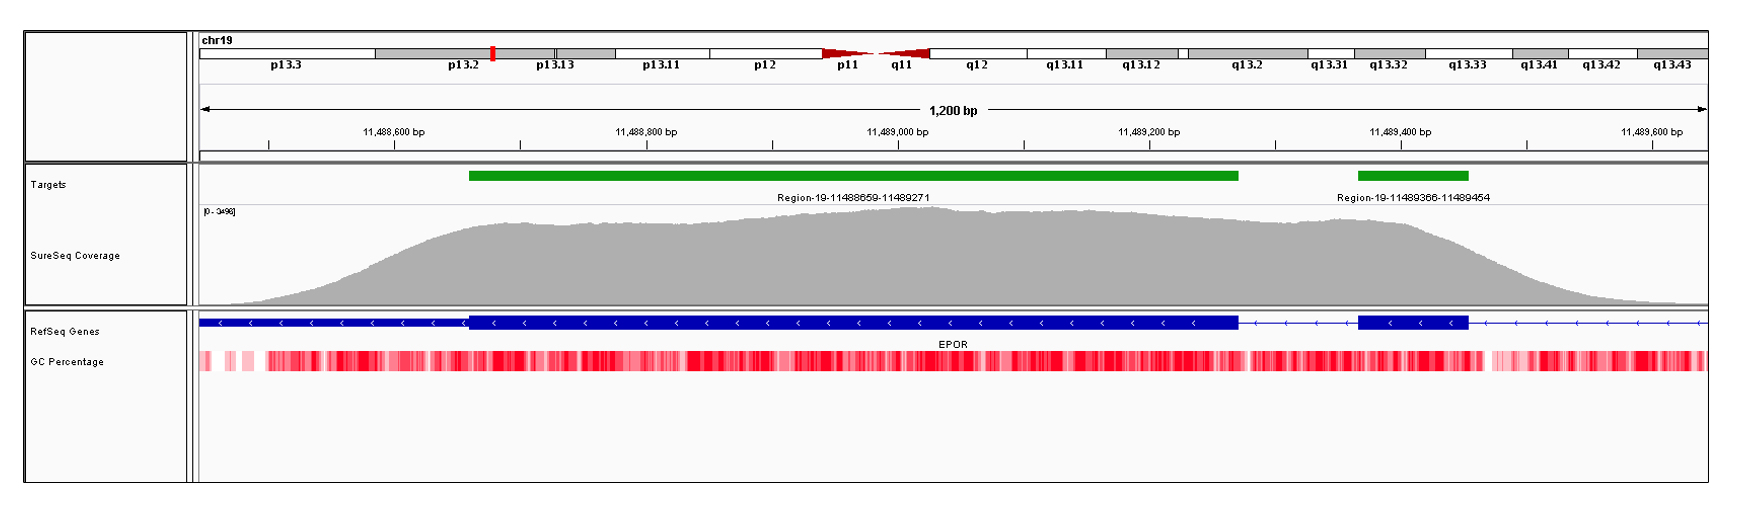 EPOR Exons 7 (hg19 chr19:11489367-11489454) and 8 (hg19 chr19:11487881-11489271). Depth of coverage per base (grey). Targeted region (green). Gene coding region as defined by RefSeq (blue). GC percentage (red). Image